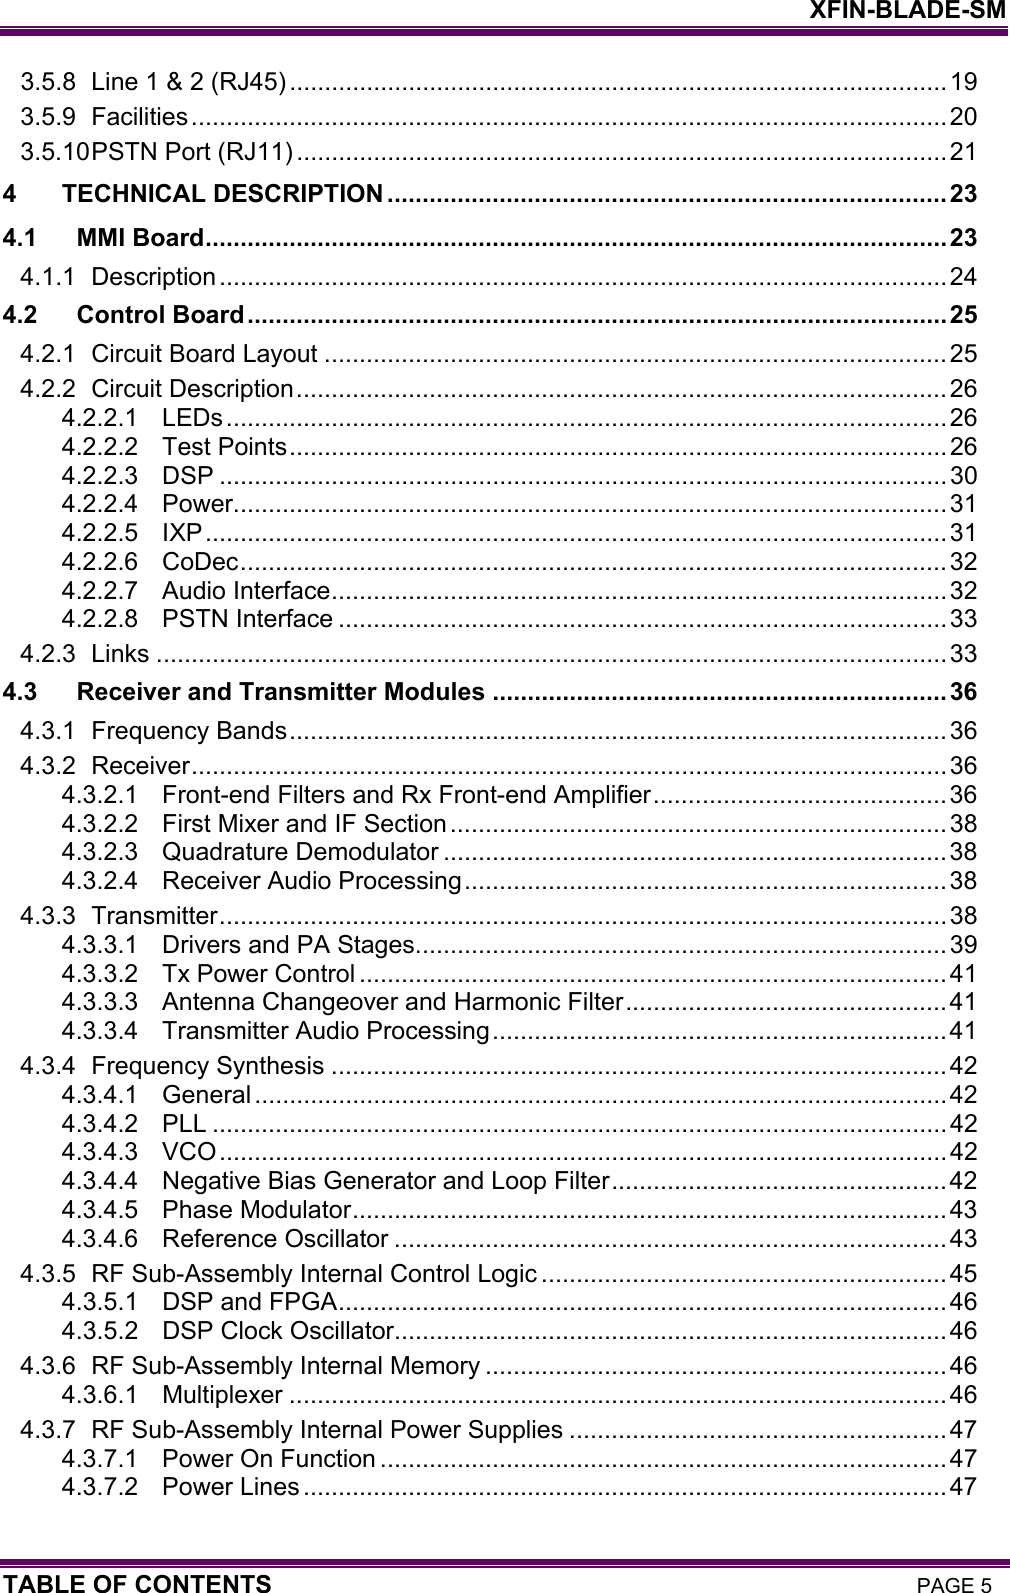    XFIN-BLADE-SM TABLE OF CONTENTS PAGE 5 3.5.8 Line 1 &amp; 2 (RJ45) ..............................................................................................19 3.5.9 Facilities............................................................................................................ 20 3.5.10 PSTN Port (RJ11) .............................................................................................21 4 TECHNICAL DESCRIPTION ................................................................................23 4.1 MMI Board.......................................................................................................... 23 4.1.1 Description........................................................................................................ 24 4.2 Control Board....................................................................................................25 4.2.1 Circuit Board Layout .........................................................................................25 4.2.2 Circuit Description............................................................................................. 26 4.2.2.1 LEDs.......................................................................................................26 4.2.2.2 Test Points..............................................................................................26 4.2.2.3 DSP ........................................................................................................30 4.2.2.4 Power......................................................................................................31 4.2.2.5 IXP..........................................................................................................31 4.2.2.6 CoDec.....................................................................................................32 4.2.2.7 Audio Interface........................................................................................ 32 4.2.2.8 PSTN Interface .......................................................................................33 4.2.3 Links .................................................................................................................33 4.3 Receiver and Transmitter Modules .................................................................36 4.3.1 Frequency Bands..............................................................................................36 4.3.2 Receiver............................................................................................................36 4.3.2.1 Front-end Filters and Rx Front-end Amplifier.......................................... 36 4.3.2.2 First Mixer and IF Section....................................................................... 38 4.3.2.3 Quadrature Demodulator ........................................................................38 4.3.2.4 Receiver Audio Processing..................................................................... 38 4.3.3 Transmitter........................................................................................................38 4.3.3.1 Drivers and PA Stages............................................................................39 4.3.3.2 Tx Power Control ....................................................................................41 4.3.3.3 Antenna Changeover and Harmonic Filter..............................................41 4.3.3.4 Transmitter Audio Processing................................................................. 41 4.3.4 Frequency Synthesis ........................................................................................42 4.3.4.1 General...................................................................................................42 4.3.4.2 PLL .........................................................................................................42 4.3.4.3 VCO........................................................................................................42 4.3.4.4 Negative Bias Generator and Loop Filter................................................42 4.3.4.5 Phase Modulator.....................................................................................43 4.3.4.6 Reference Oscillator ...............................................................................43 4.3.5 RF Sub-Assembly Internal Control Logic ..........................................................45 4.3.5.1 DSP and FPGA.......................................................................................46 4.3.5.2 DSP Clock Oscillator...............................................................................46 4.3.6 RF Sub-Assembly Internal Memory ..................................................................46 4.3.6.1 Multiplexer ..............................................................................................46 4.3.7 RF Sub-Assembly Internal Power Supplies ......................................................47 4.3.7.1 Power On Function .................................................................................47 4.3.7.2 Power Lines ............................................................................................47 